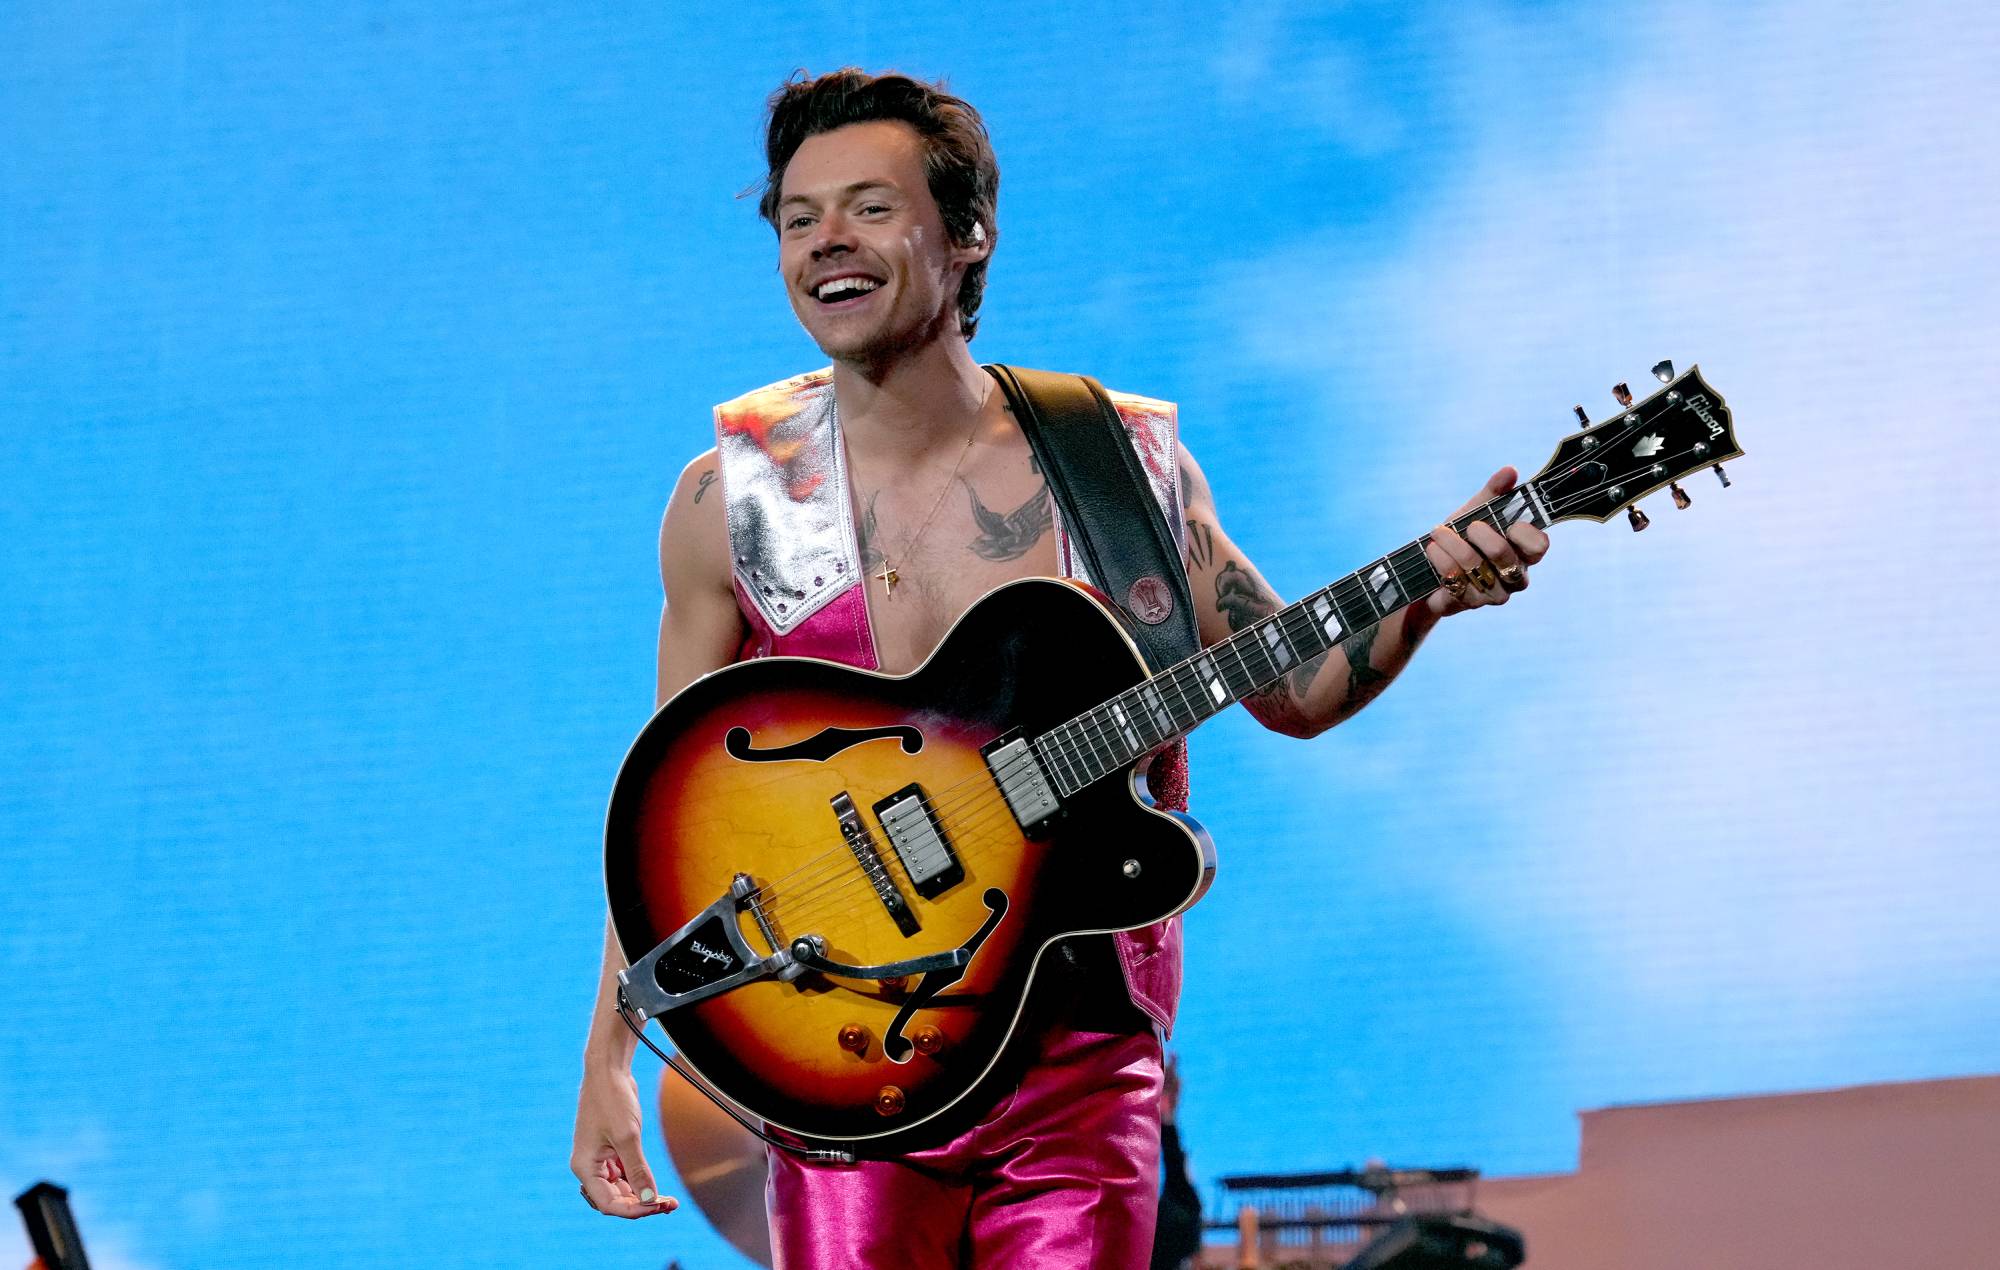 Harry Styles performs on the Coachella stage during the 2022 Coachella Valley Music And Arts Festival on April 22, 2022 in Indio, California. (Photo by Kevin Mazur/Getty Images for Harry Styles)